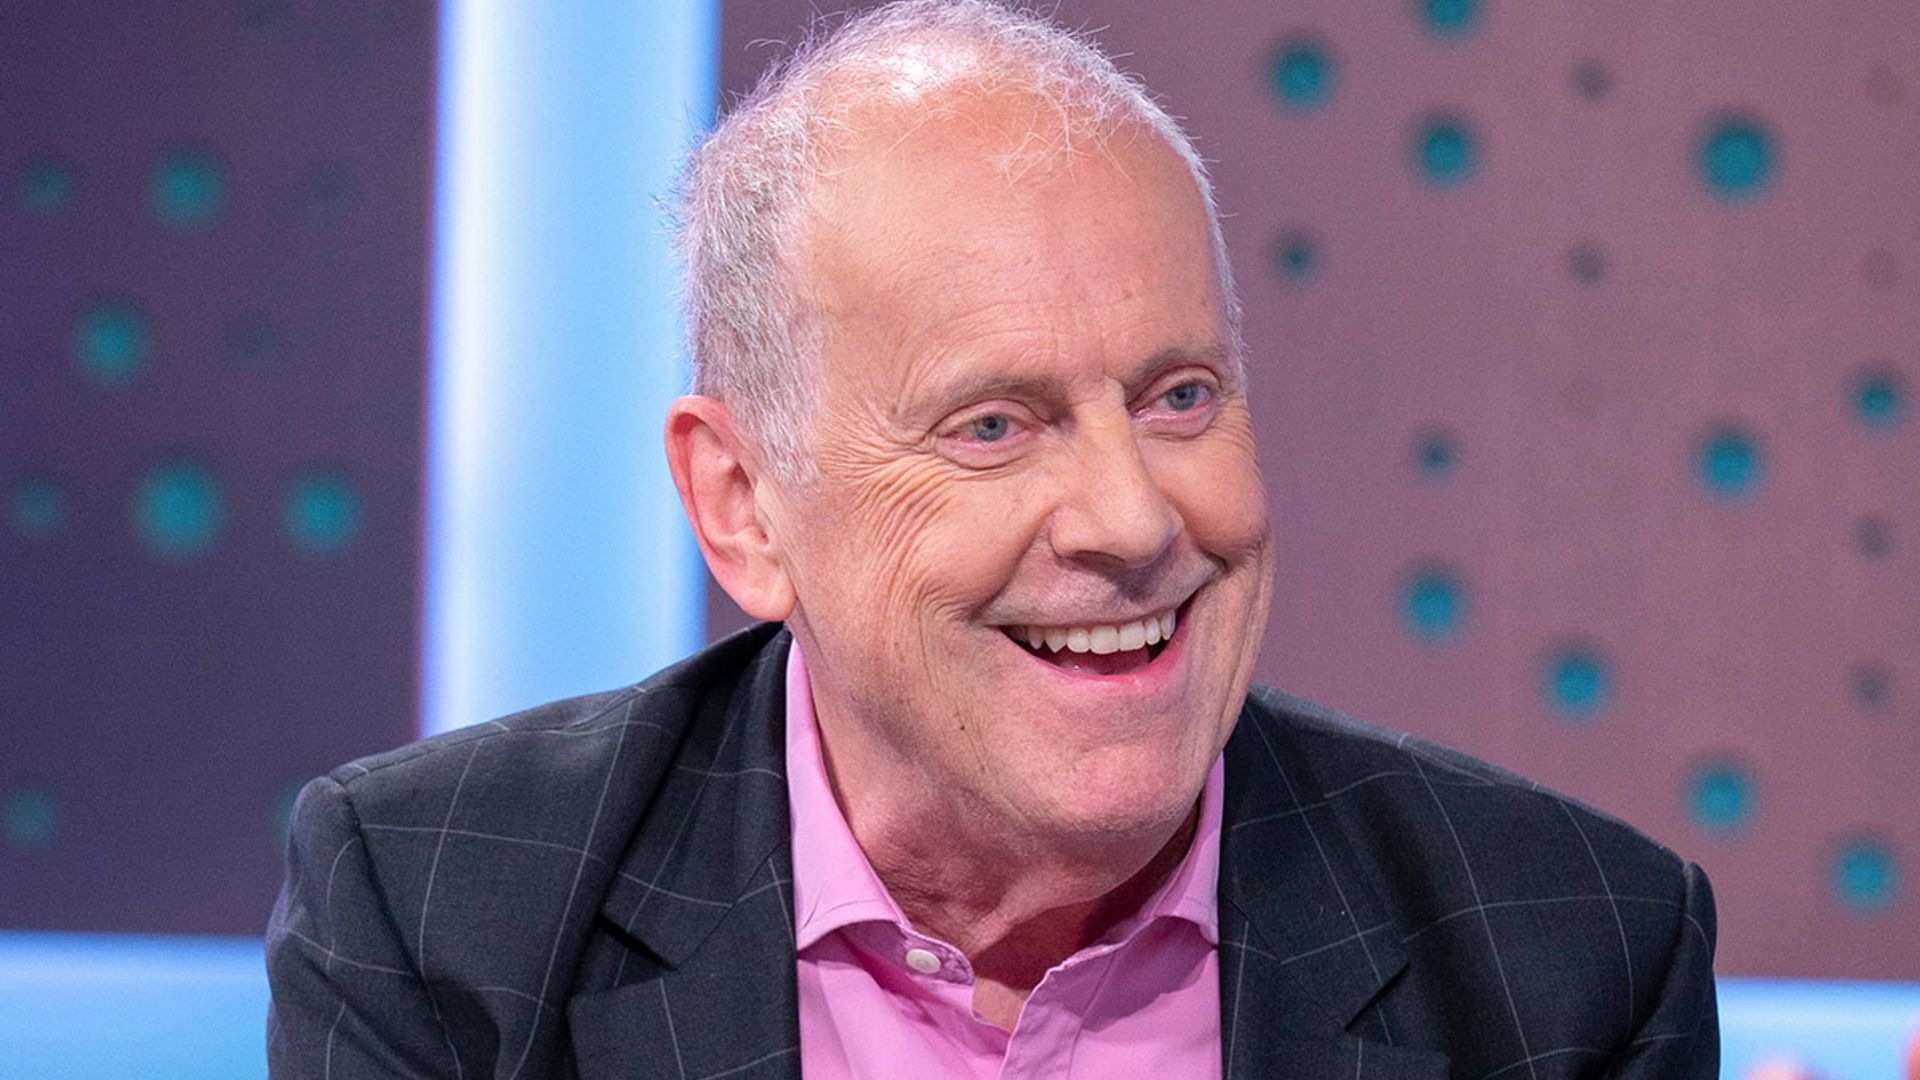 All you need to know about Celebrity Gogglebox star Gyles Brandreth from career to his wife